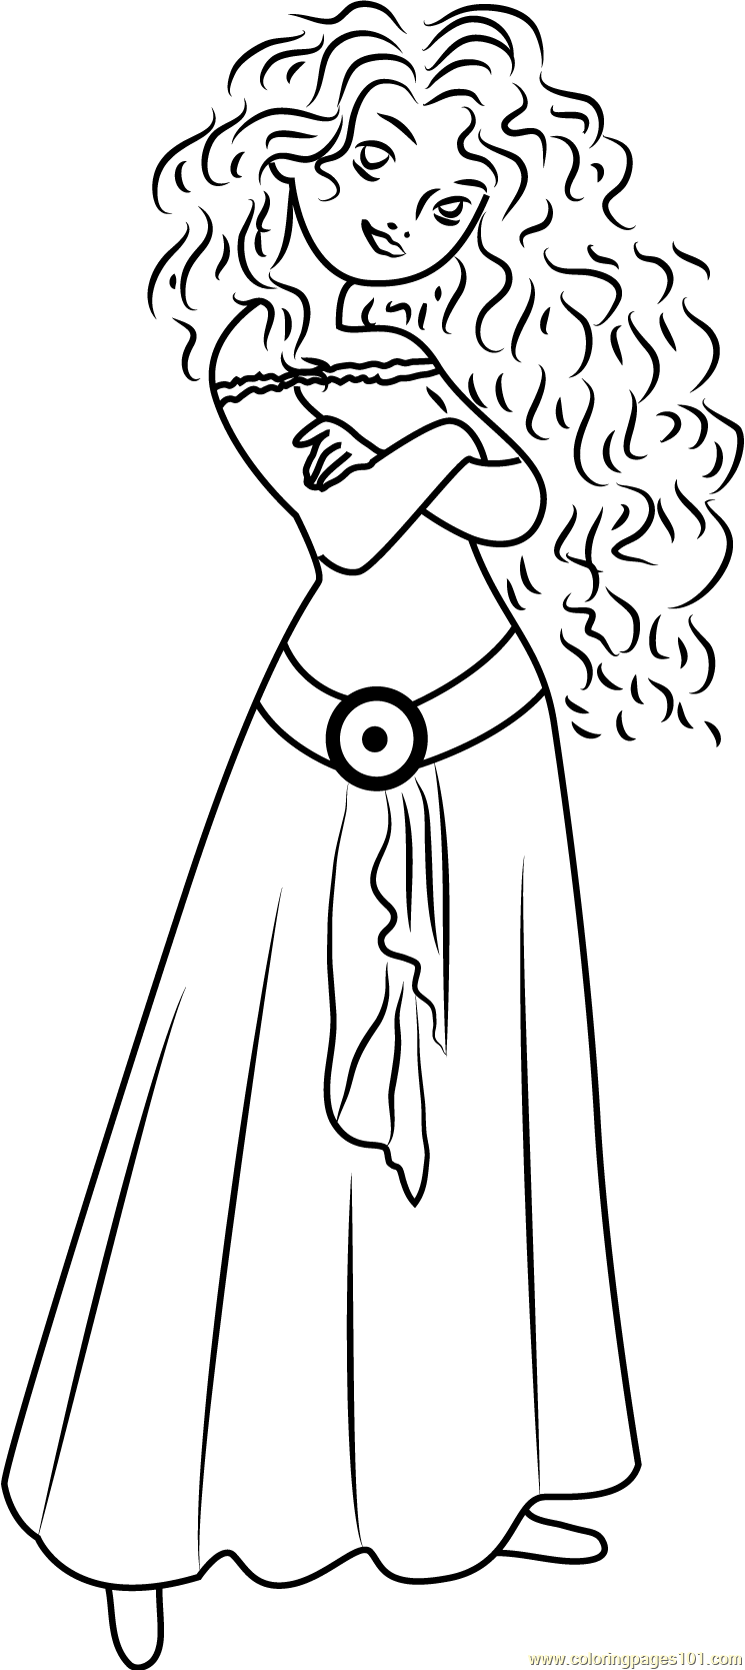 Cute Merida Coloring Page for Kids - Free Brave Printable Coloring